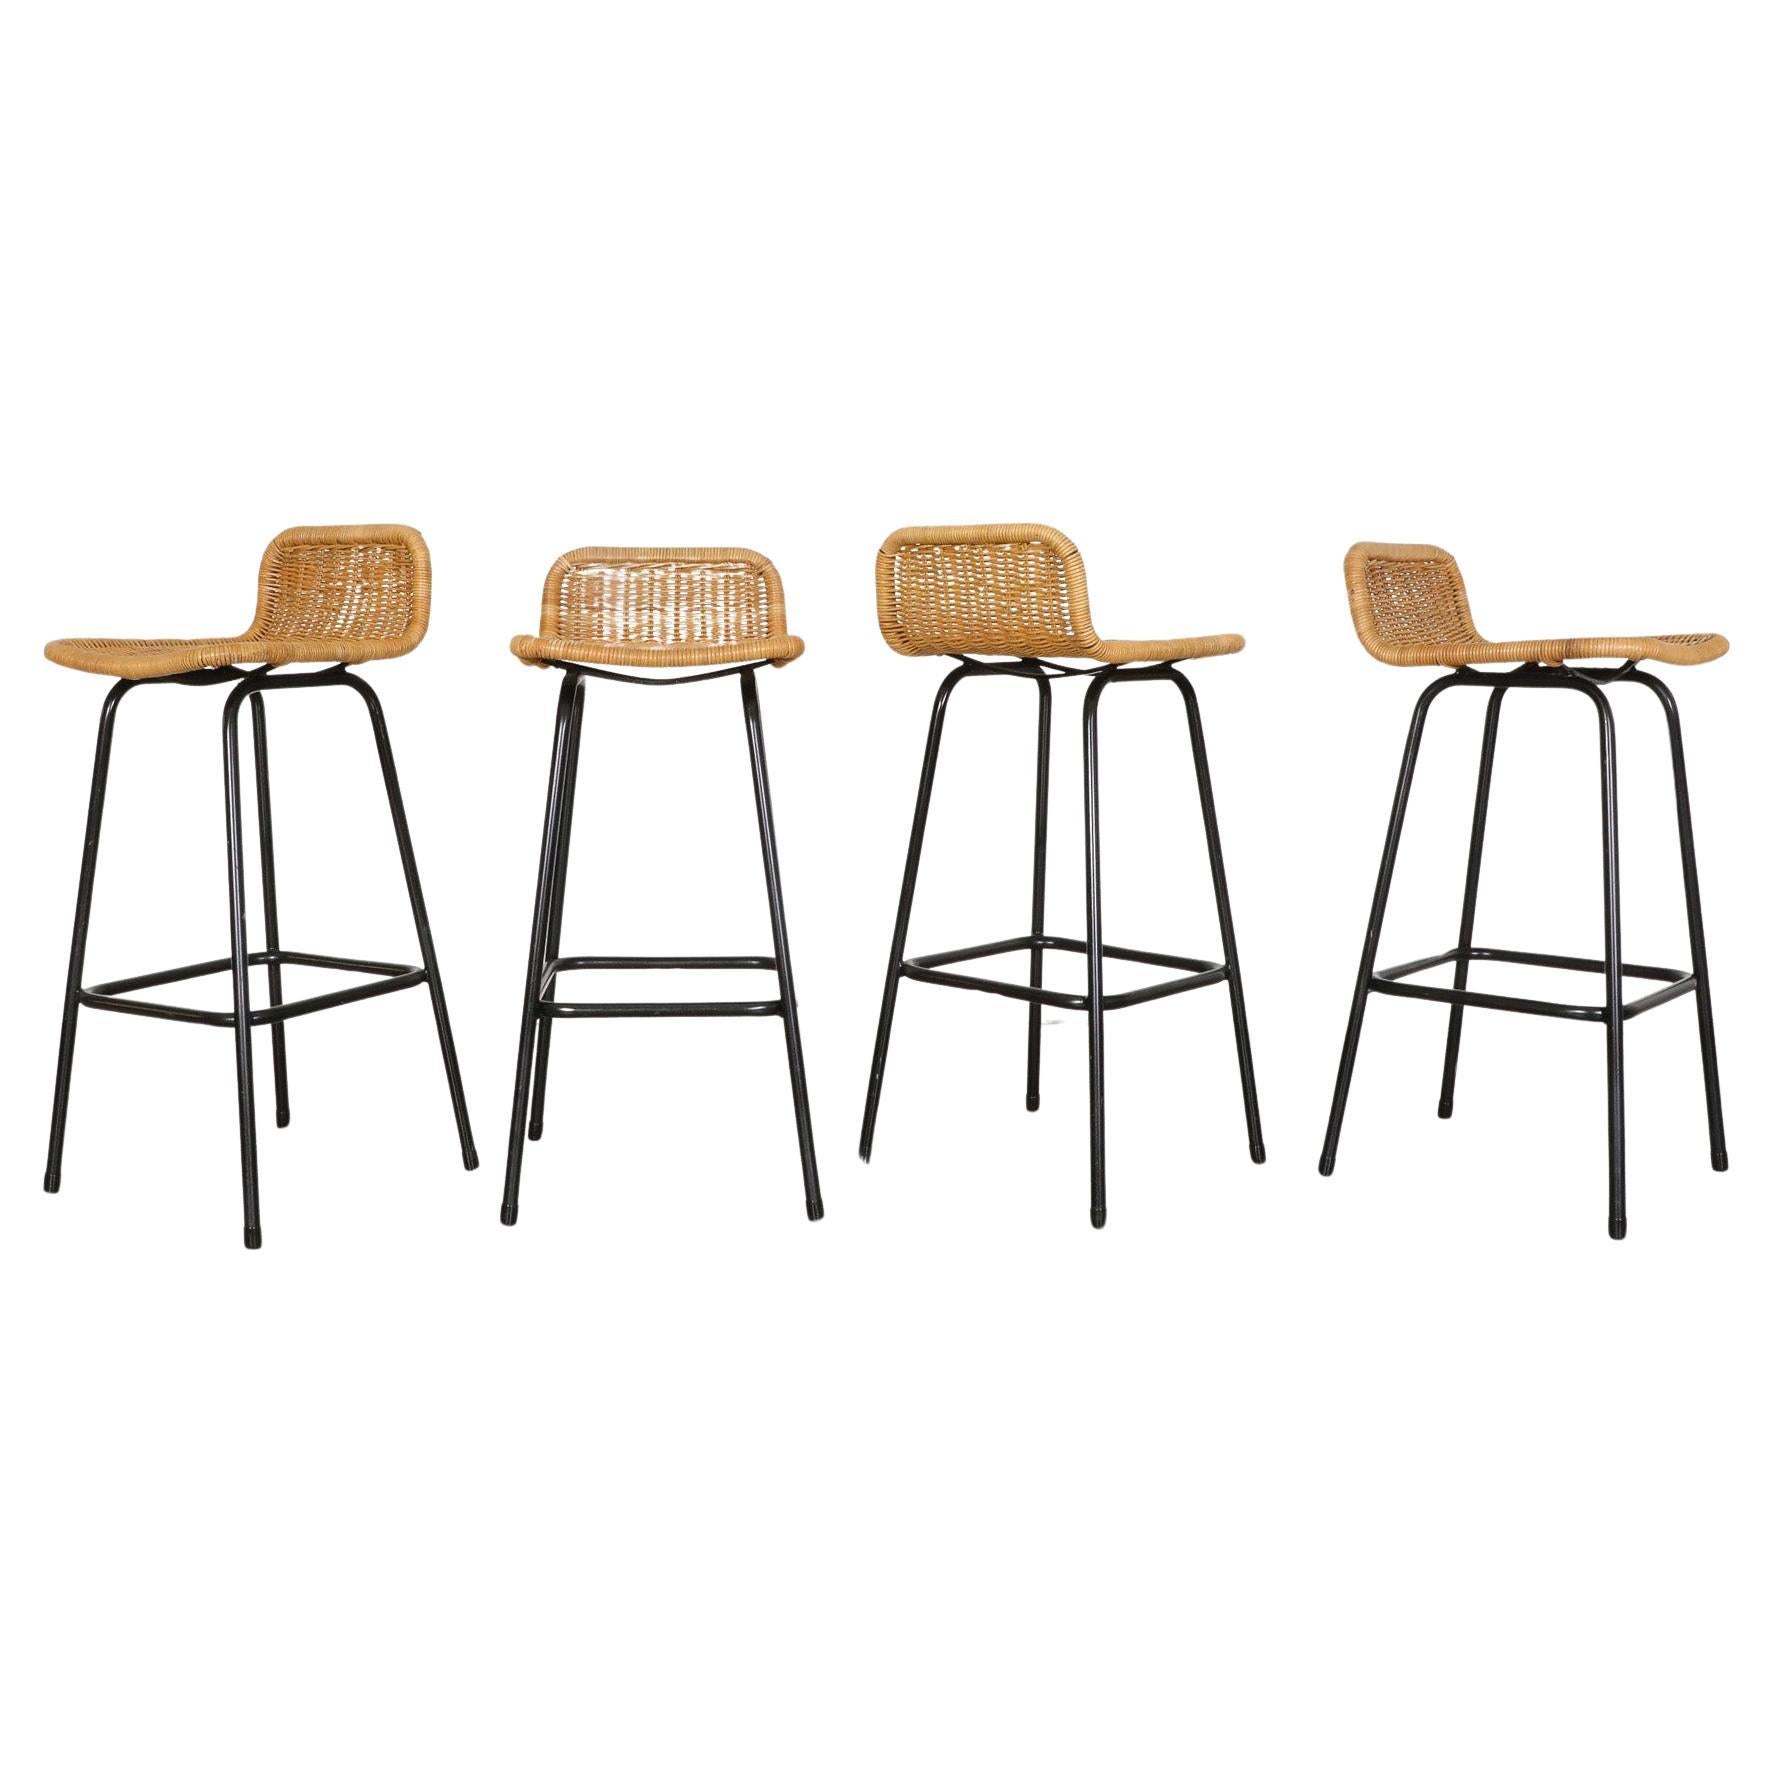 Set of 4 Charlotte Perriand Style Wicker Bar Stools with Black Legs